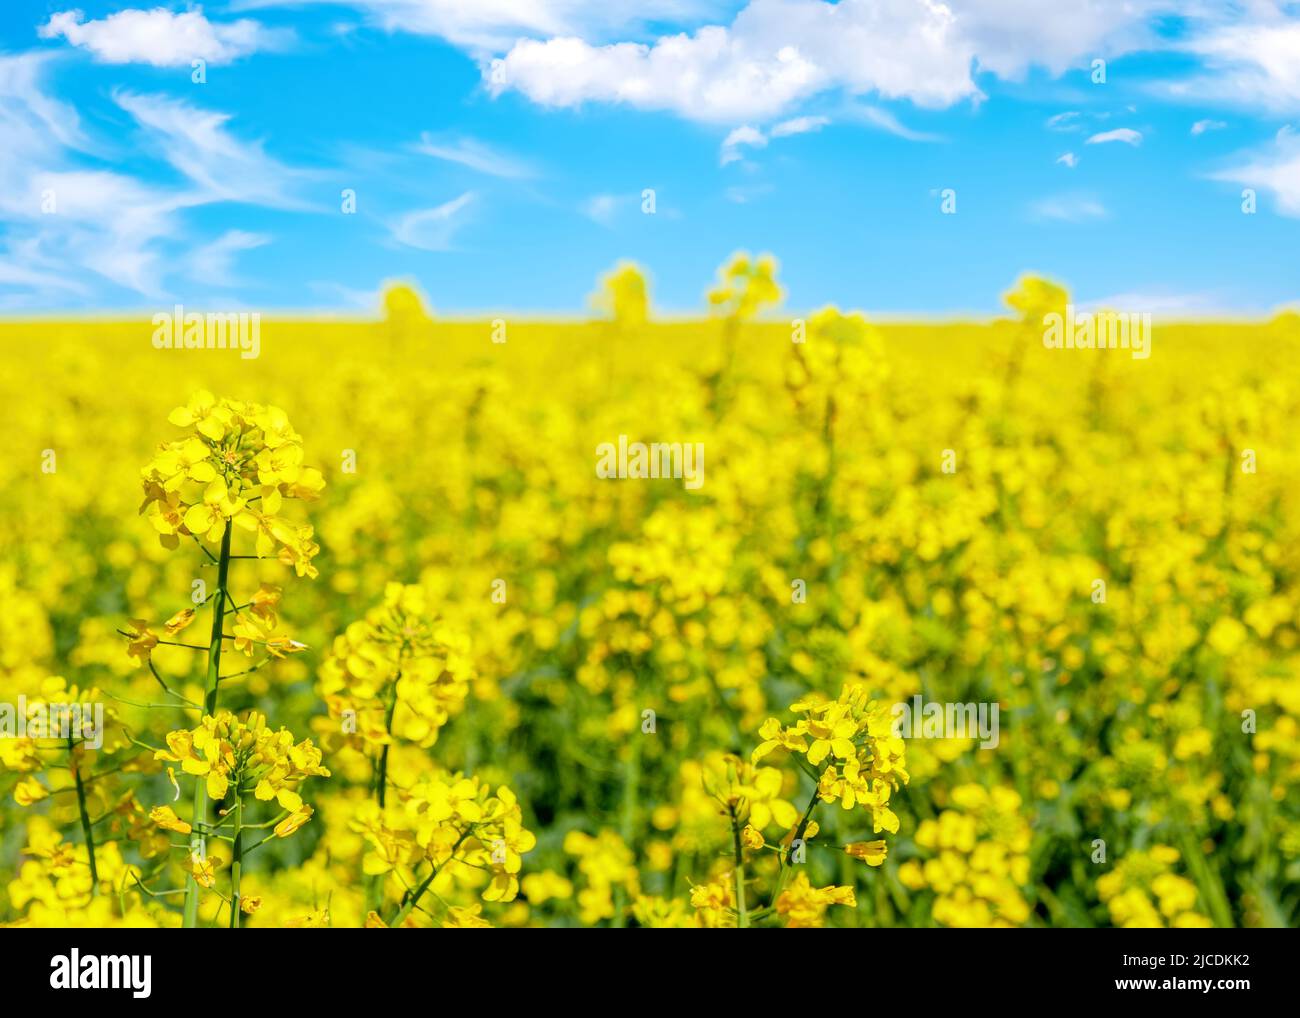 Yellow rapeseed field and blue sky with clouds on a sunny day Stock Photo